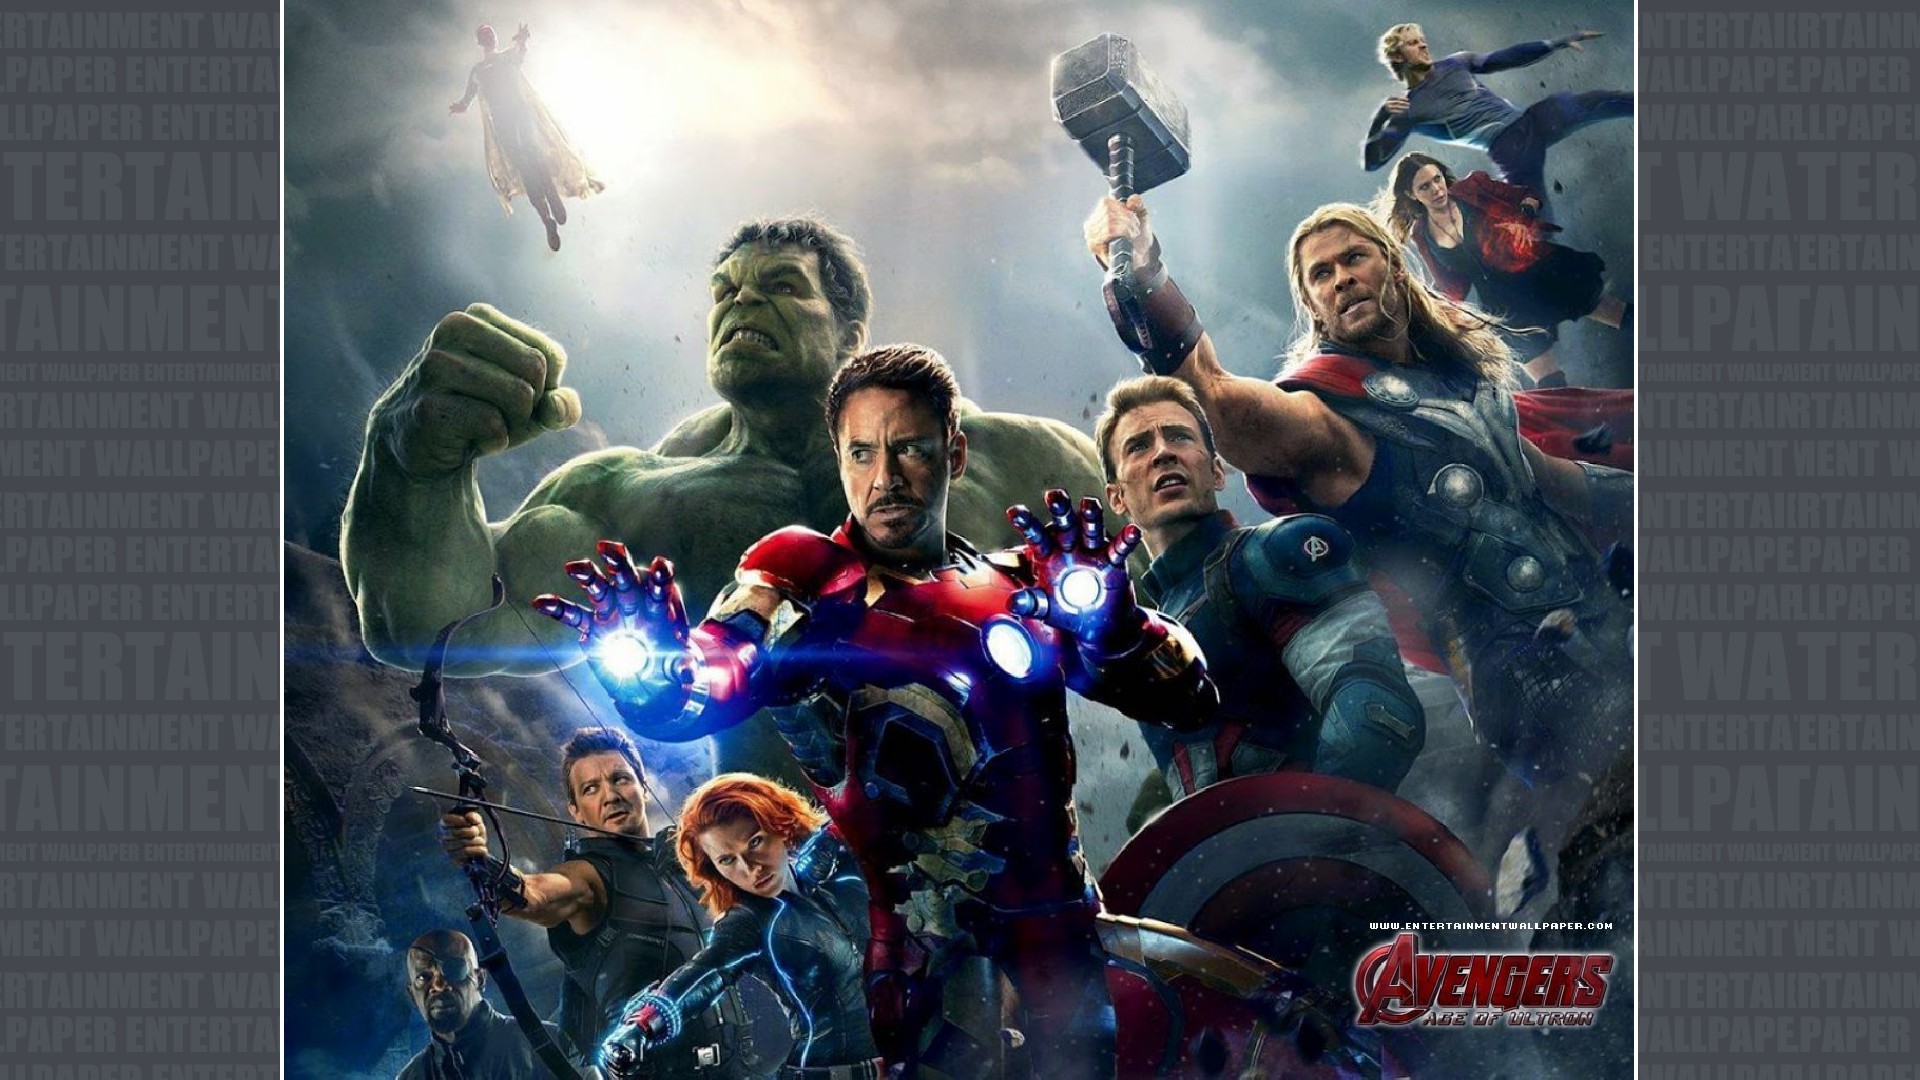 1920x1080 Avengers: Age of Ultron Wallpaper - Original size, download now.